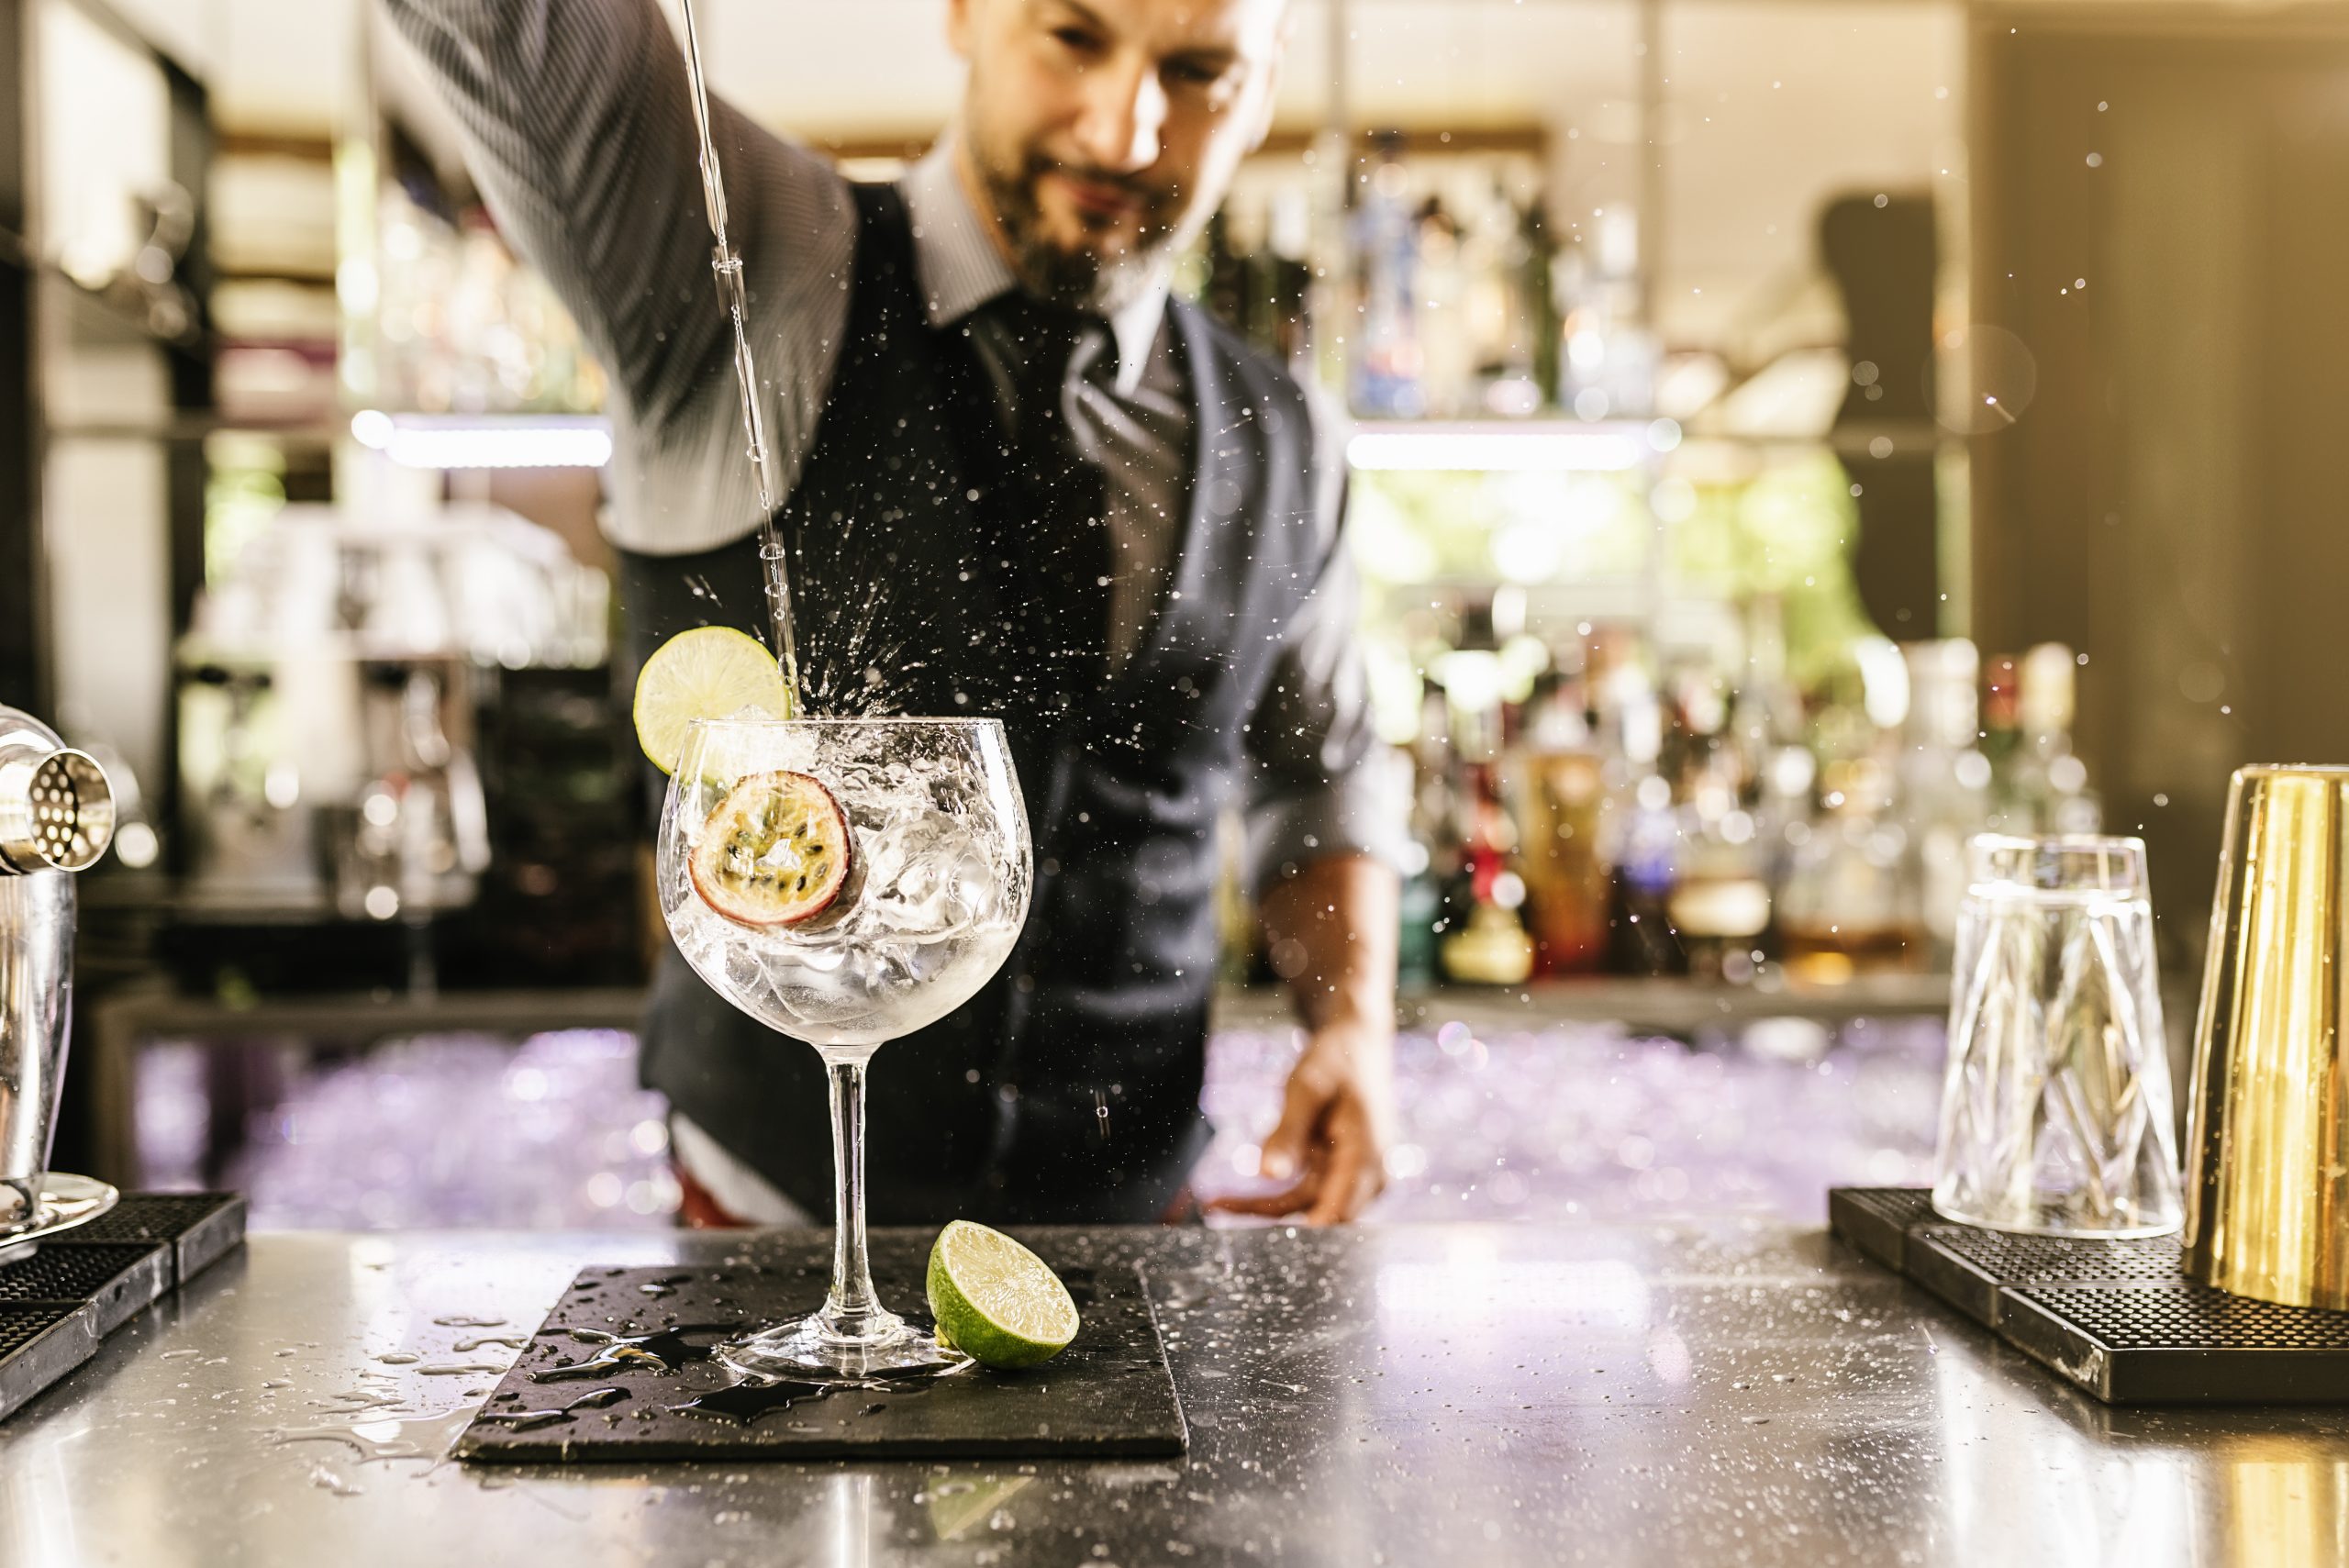 New strategy to boost Irish gin exports launched in Belfast